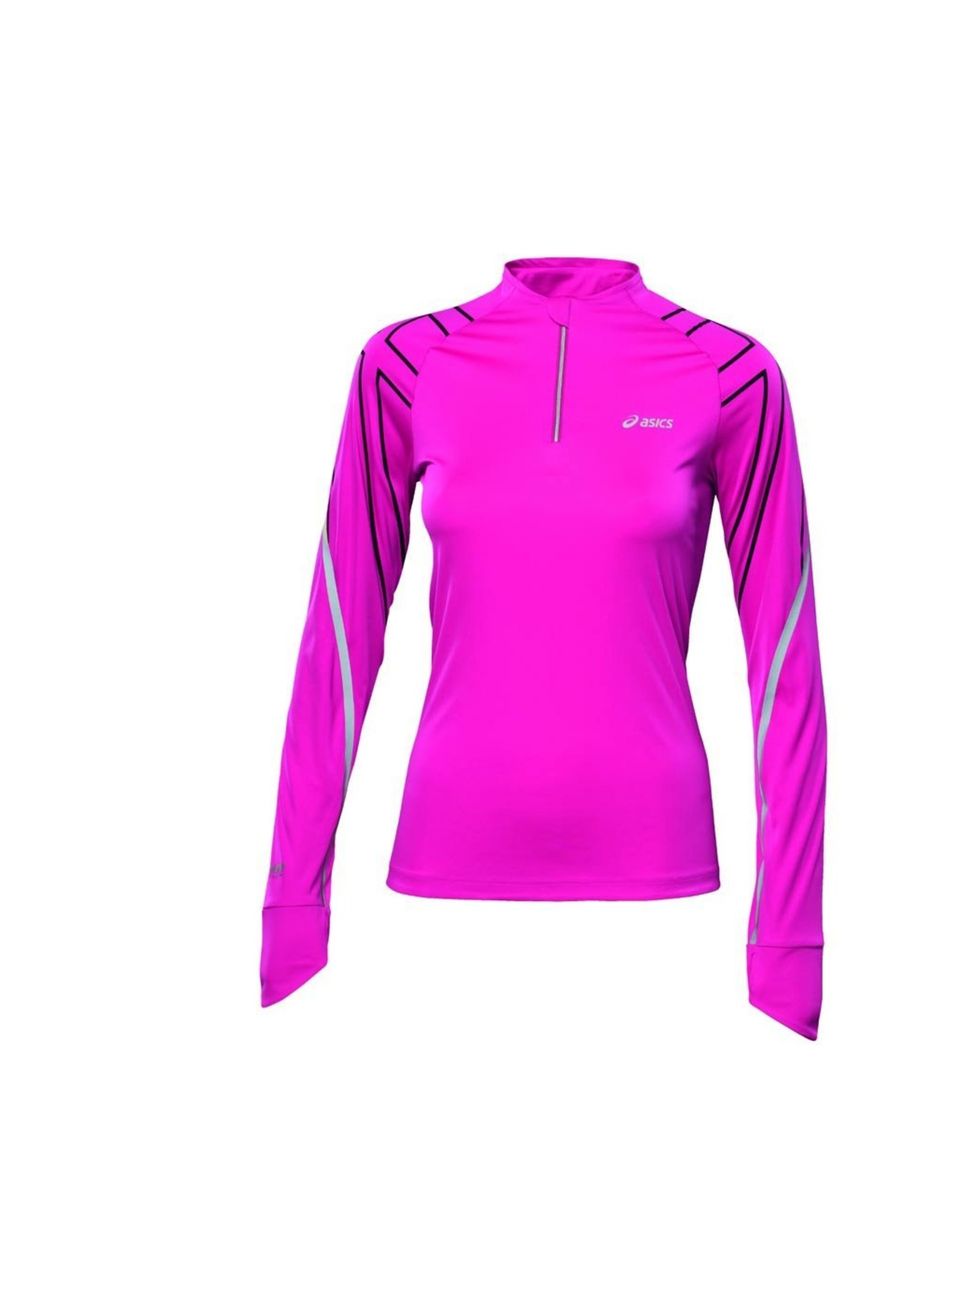 <p><a href="http://www.asics.co.uk/Shop/Women/AKASHI-LONG-SLEEVE-HALF-ZIP-TOP/p/0010174184.0692">Asics Akashi Long-sleeve Half-zip Top, £45.50</a></p><p>Not only is this top in the sale (it was originally £65) it keeps you warm and dry, protects from UV r